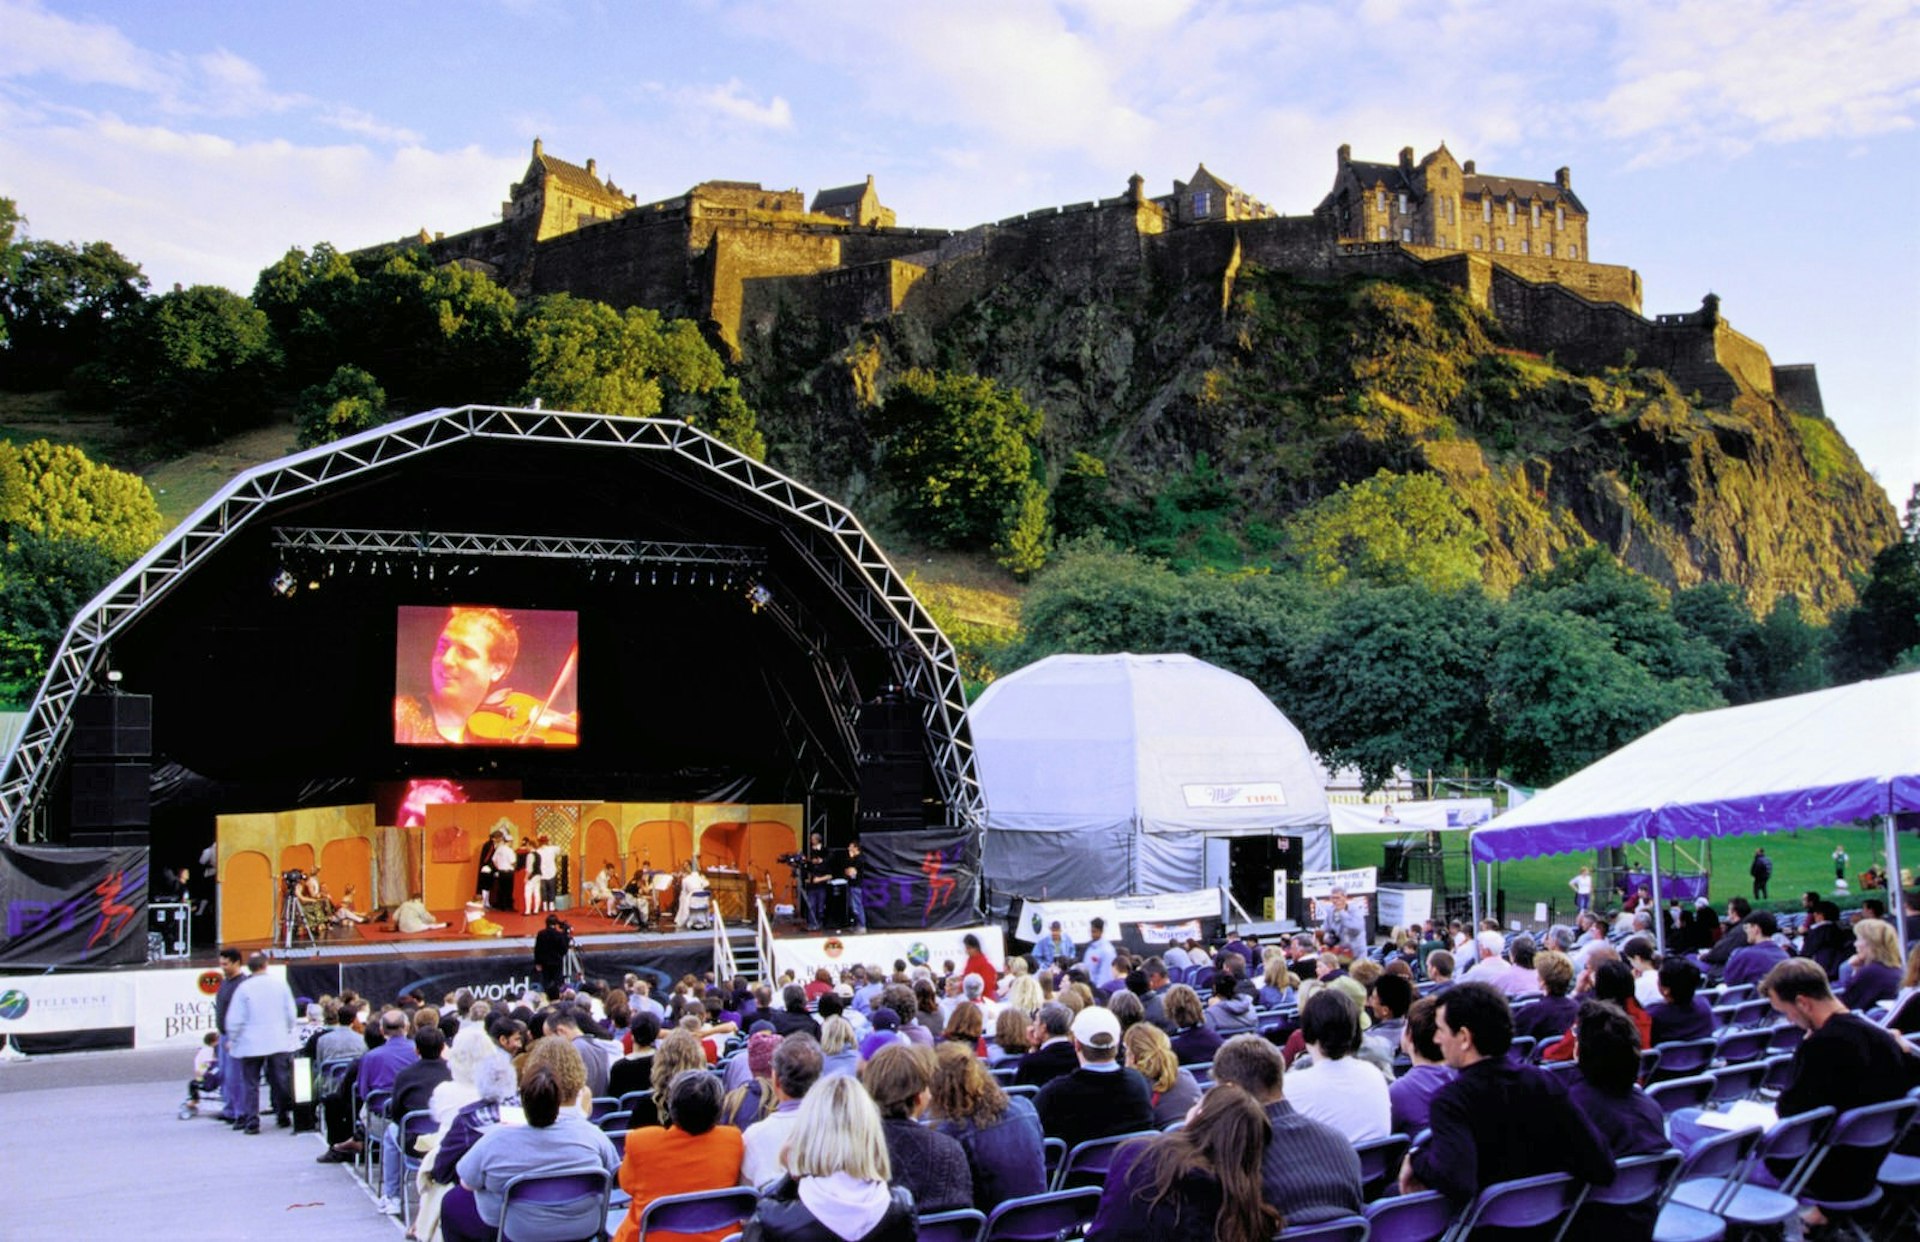 In a city as beautiful as Edinburgh you'll often get a great view to go with a great show © Gareth Mccormack / Lonely Planet Getty Images